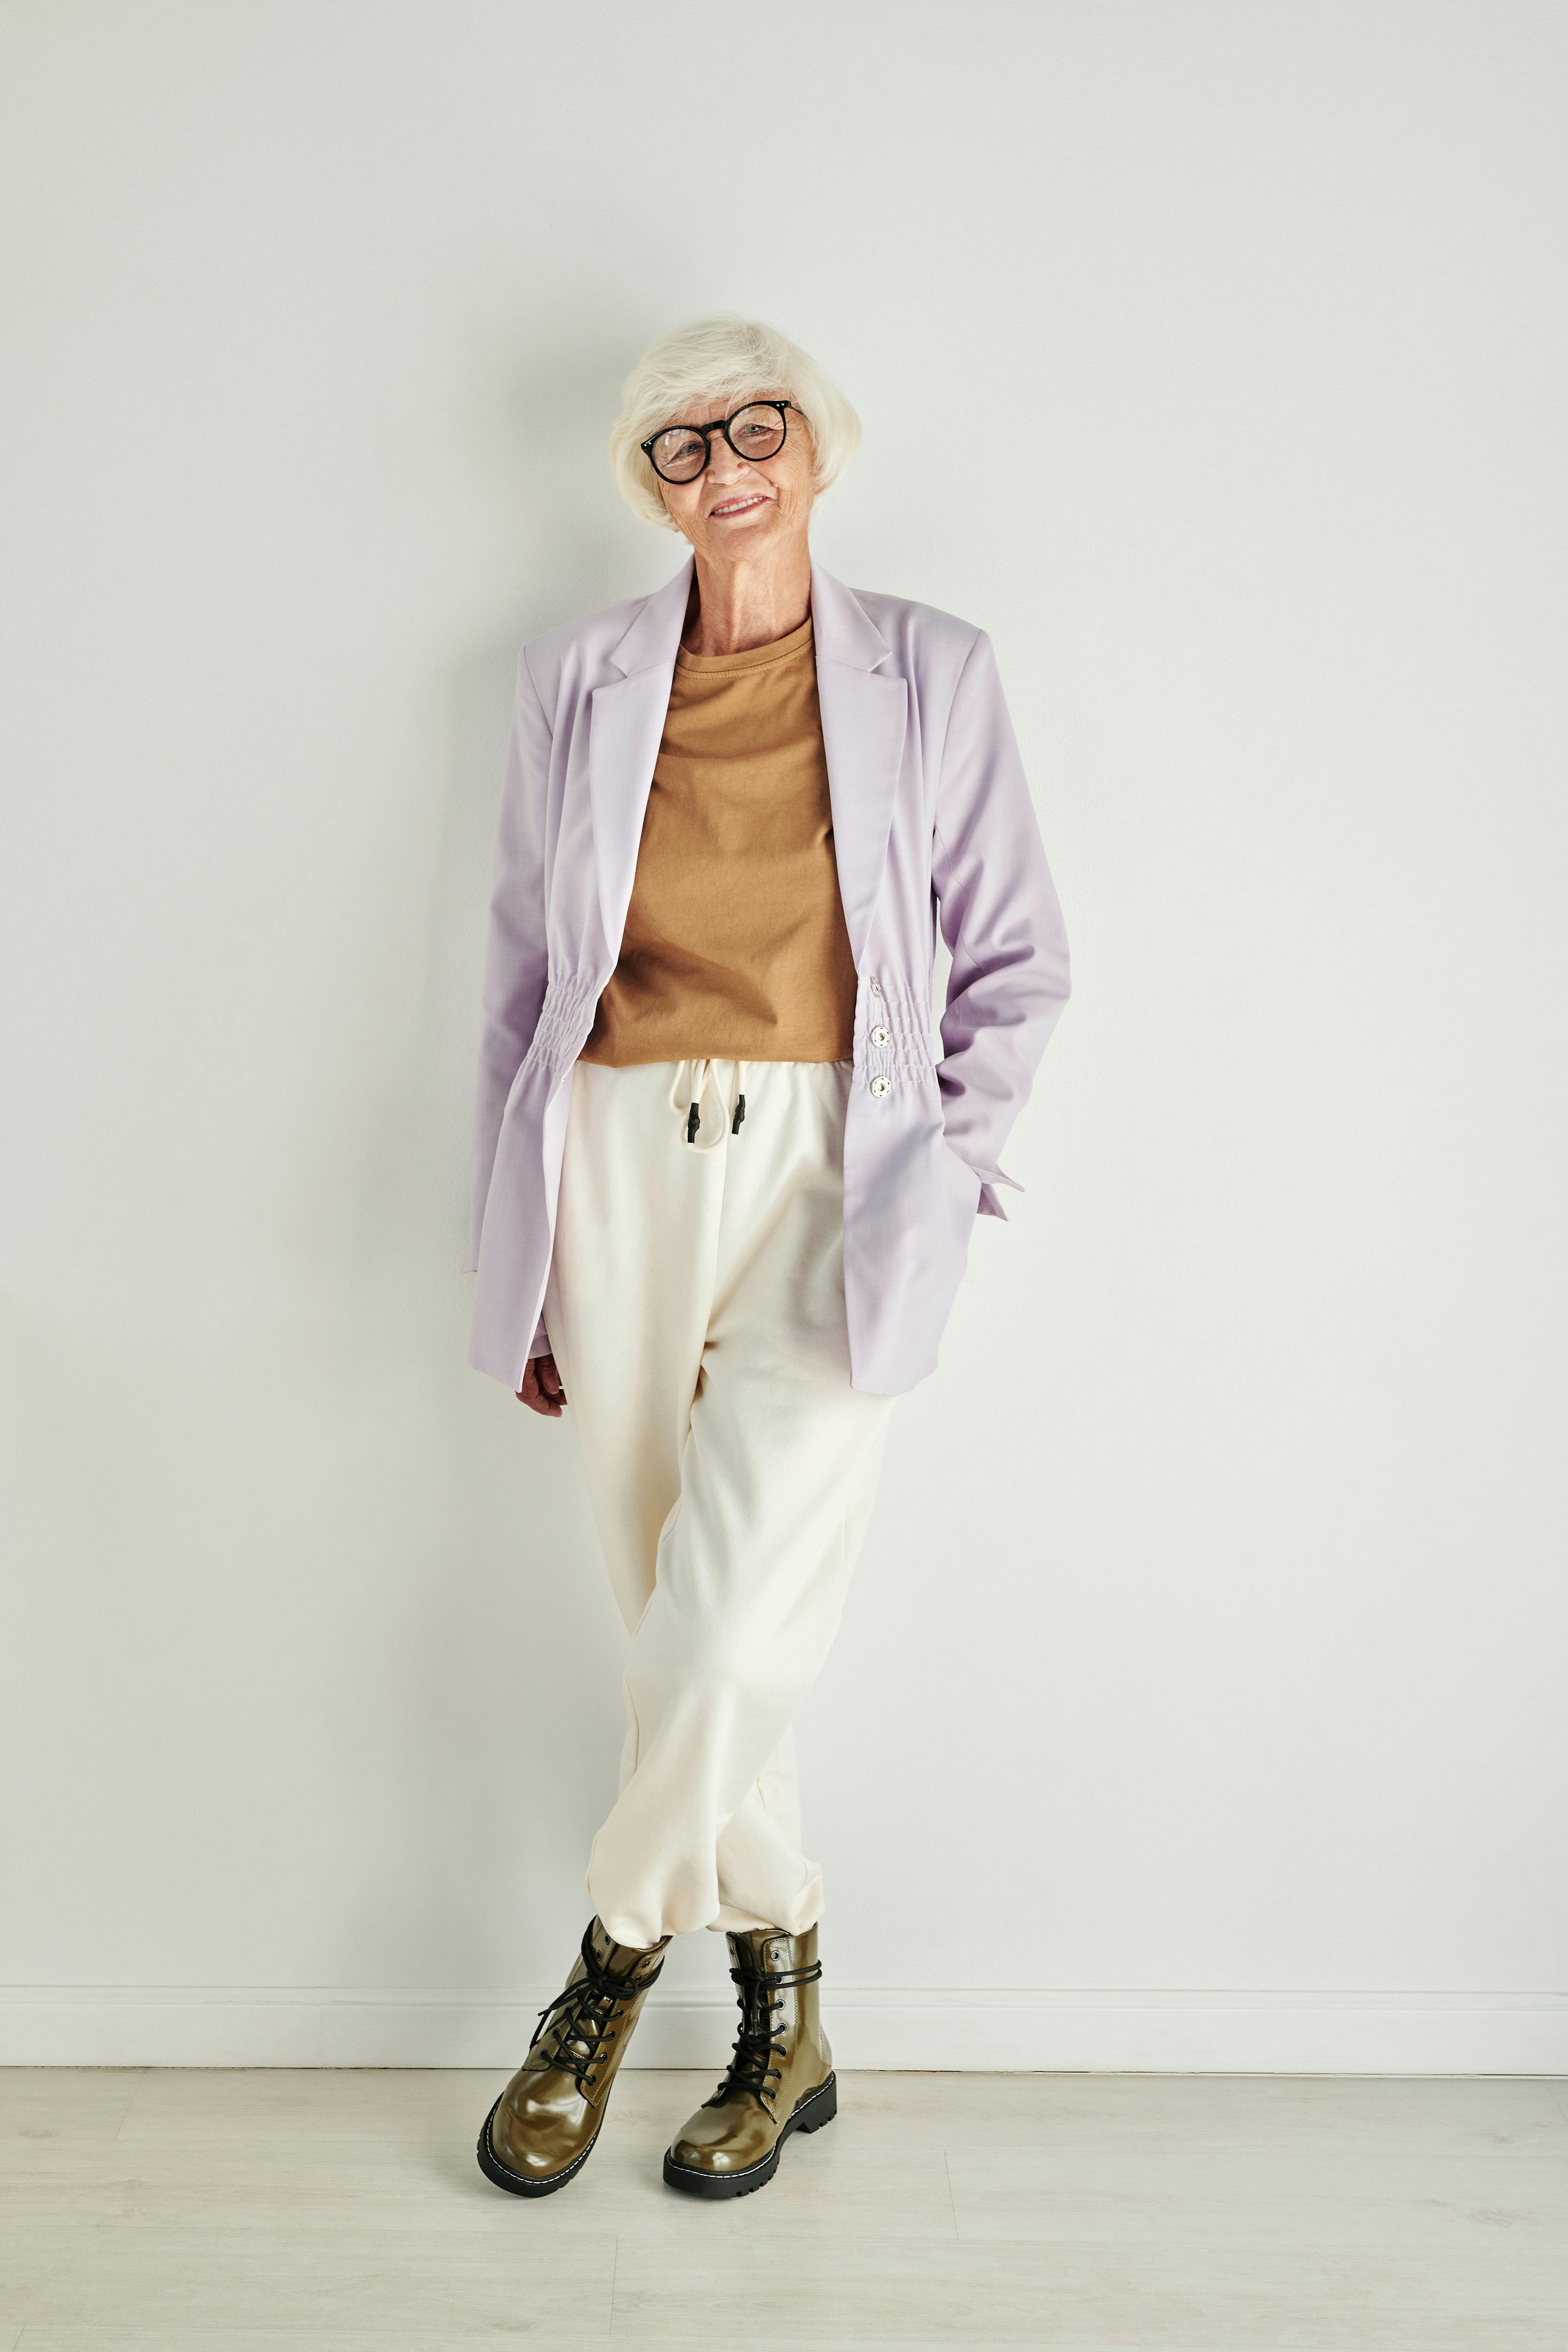 Stylish Elderly Woman in Black Leather Jacket and White Pants with